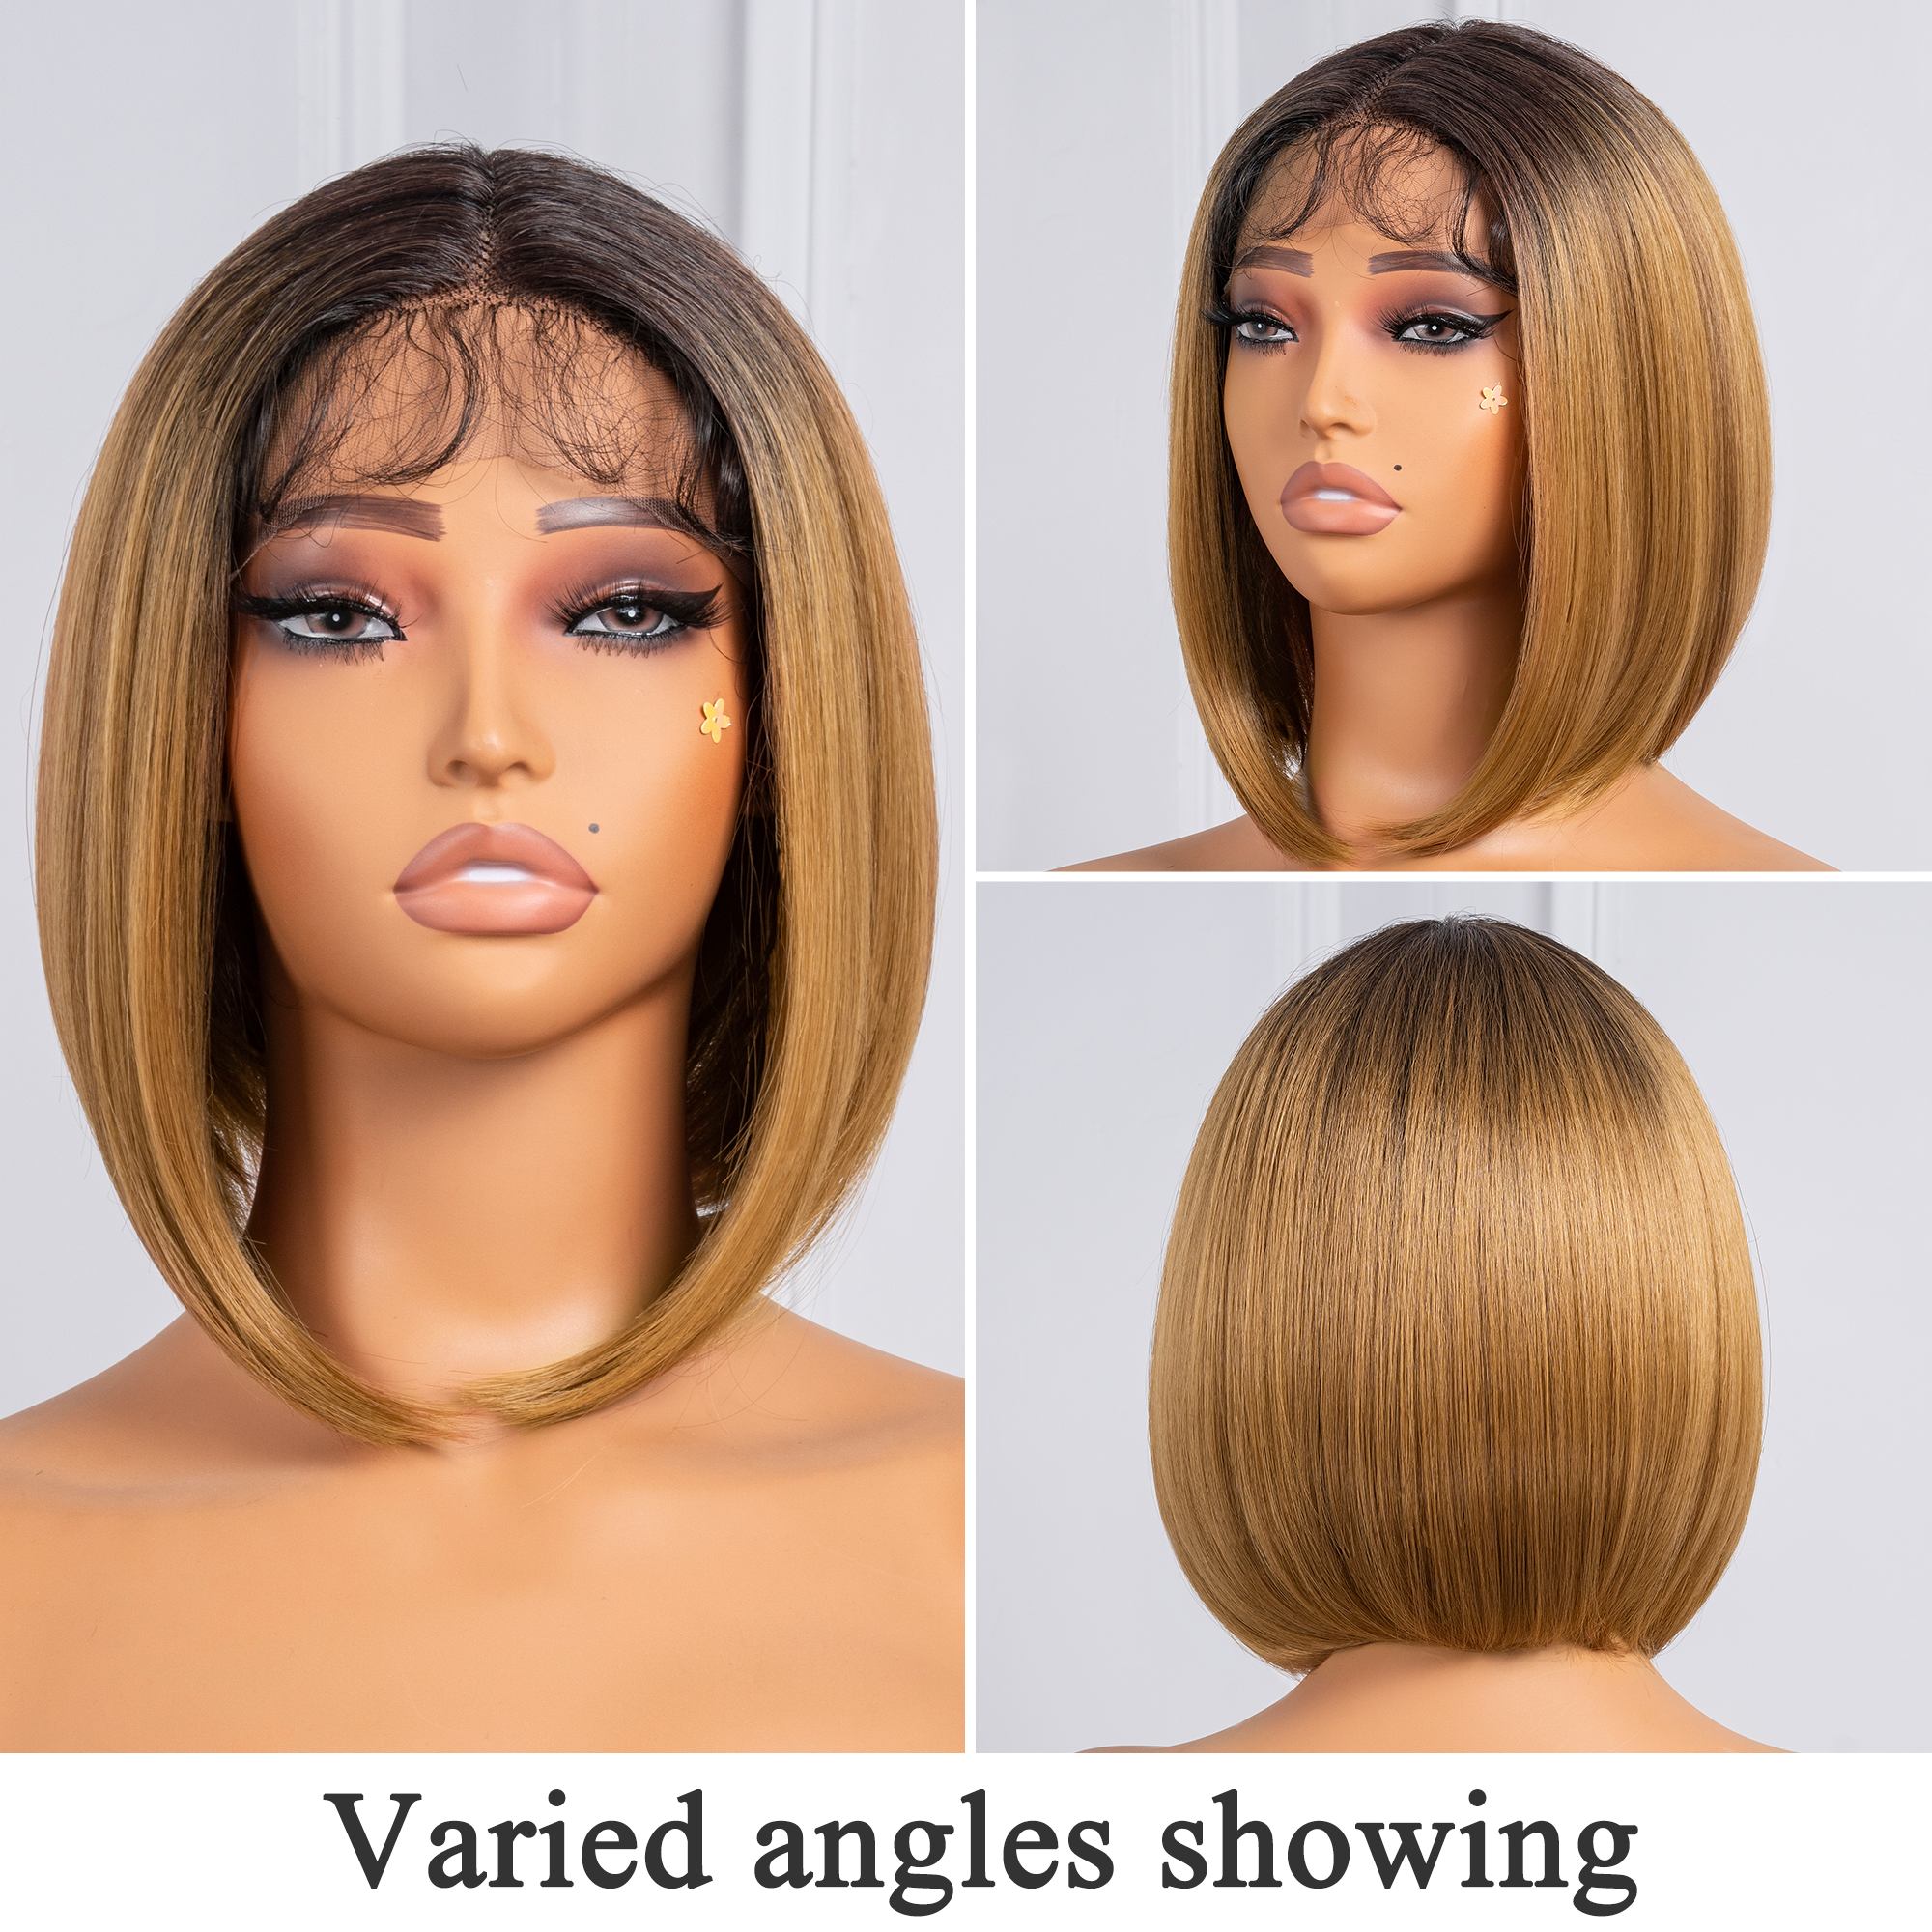 TOYOTRESS AIRY YAKI STRAIGHT T-MIDDLE PART LACE FRONT WIGS WITH BABY HAIR - 12 INCH BOB HUMAN HAIR RIVAL WIG OMBRE BROWN WITH BLACK ROOTS WIG(1027）